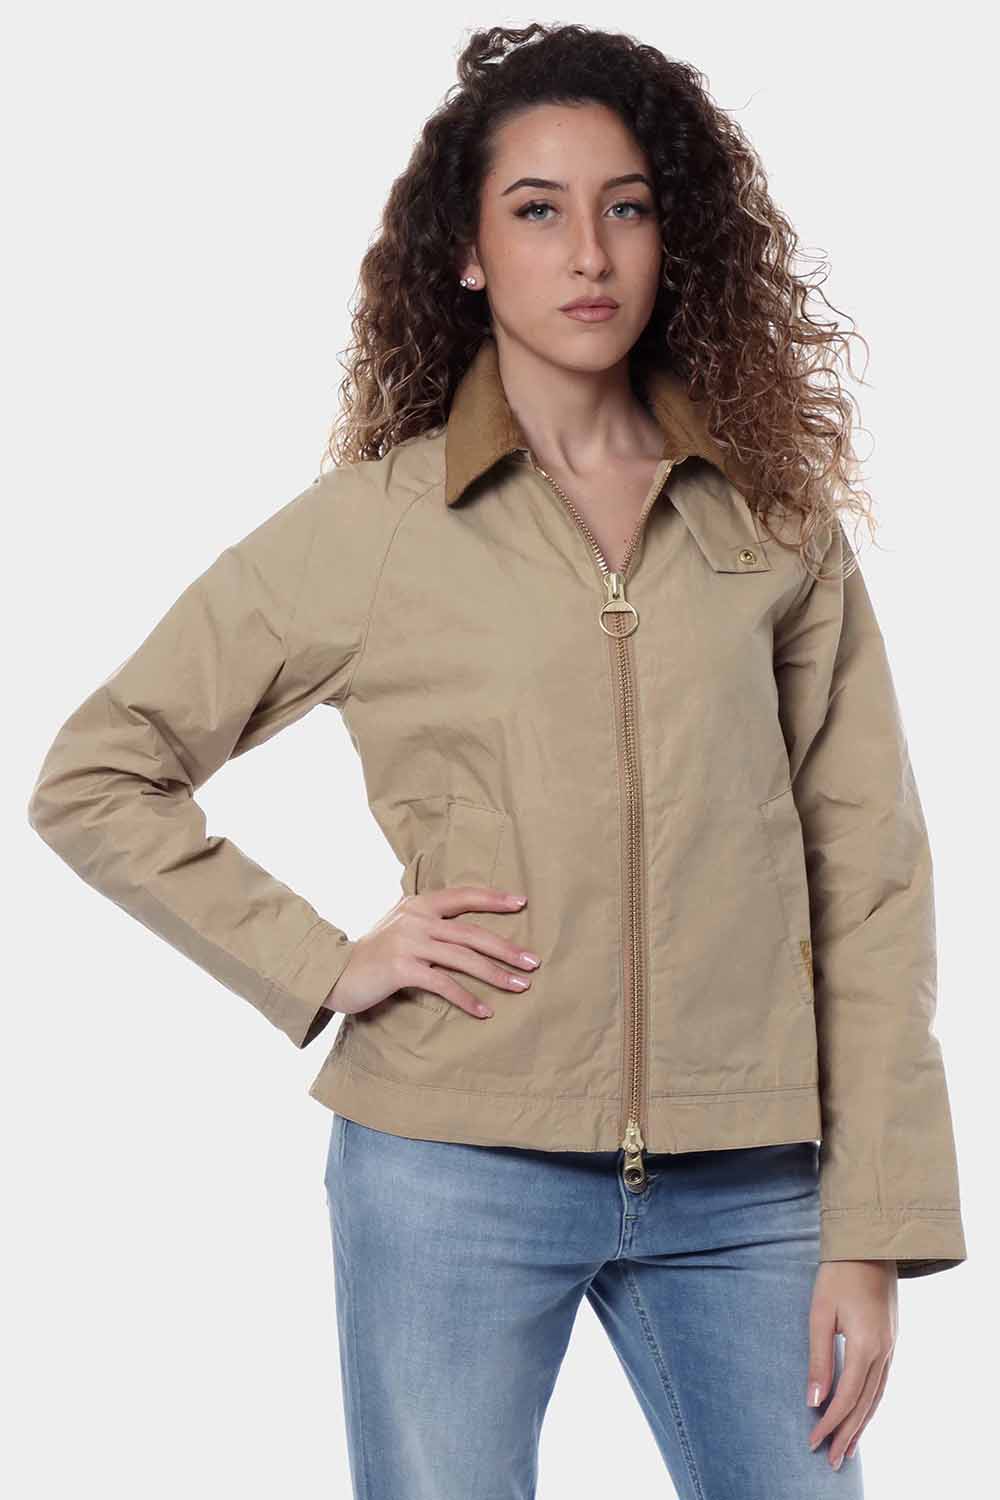 Barbour Impermeabile Donna LSP0038 Beige